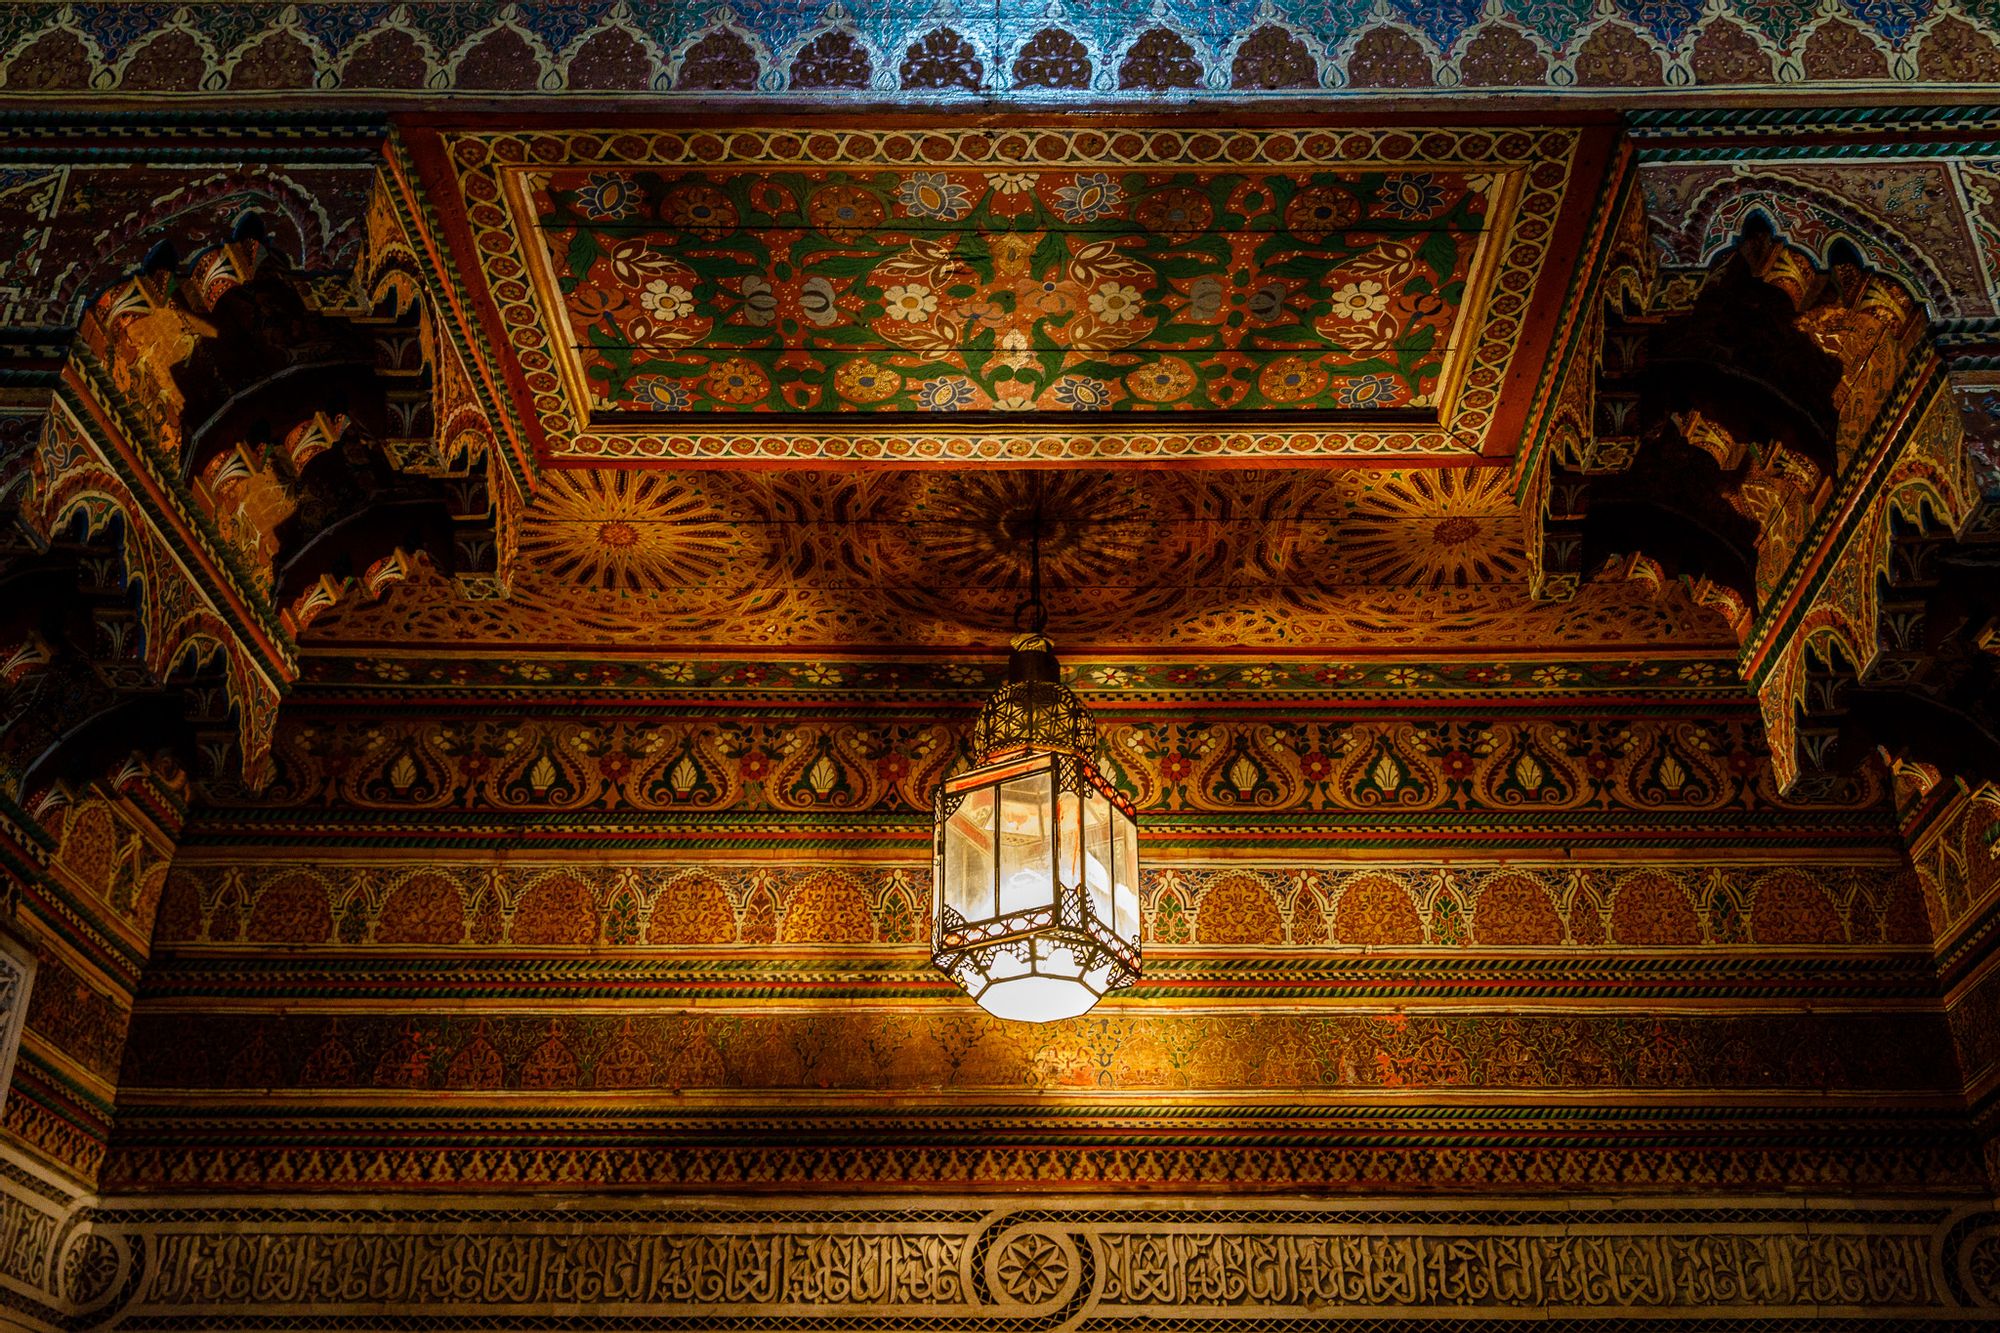 A Moroccan lamp reflects light on an ornately painted ceiling in Imlil, Morocco.